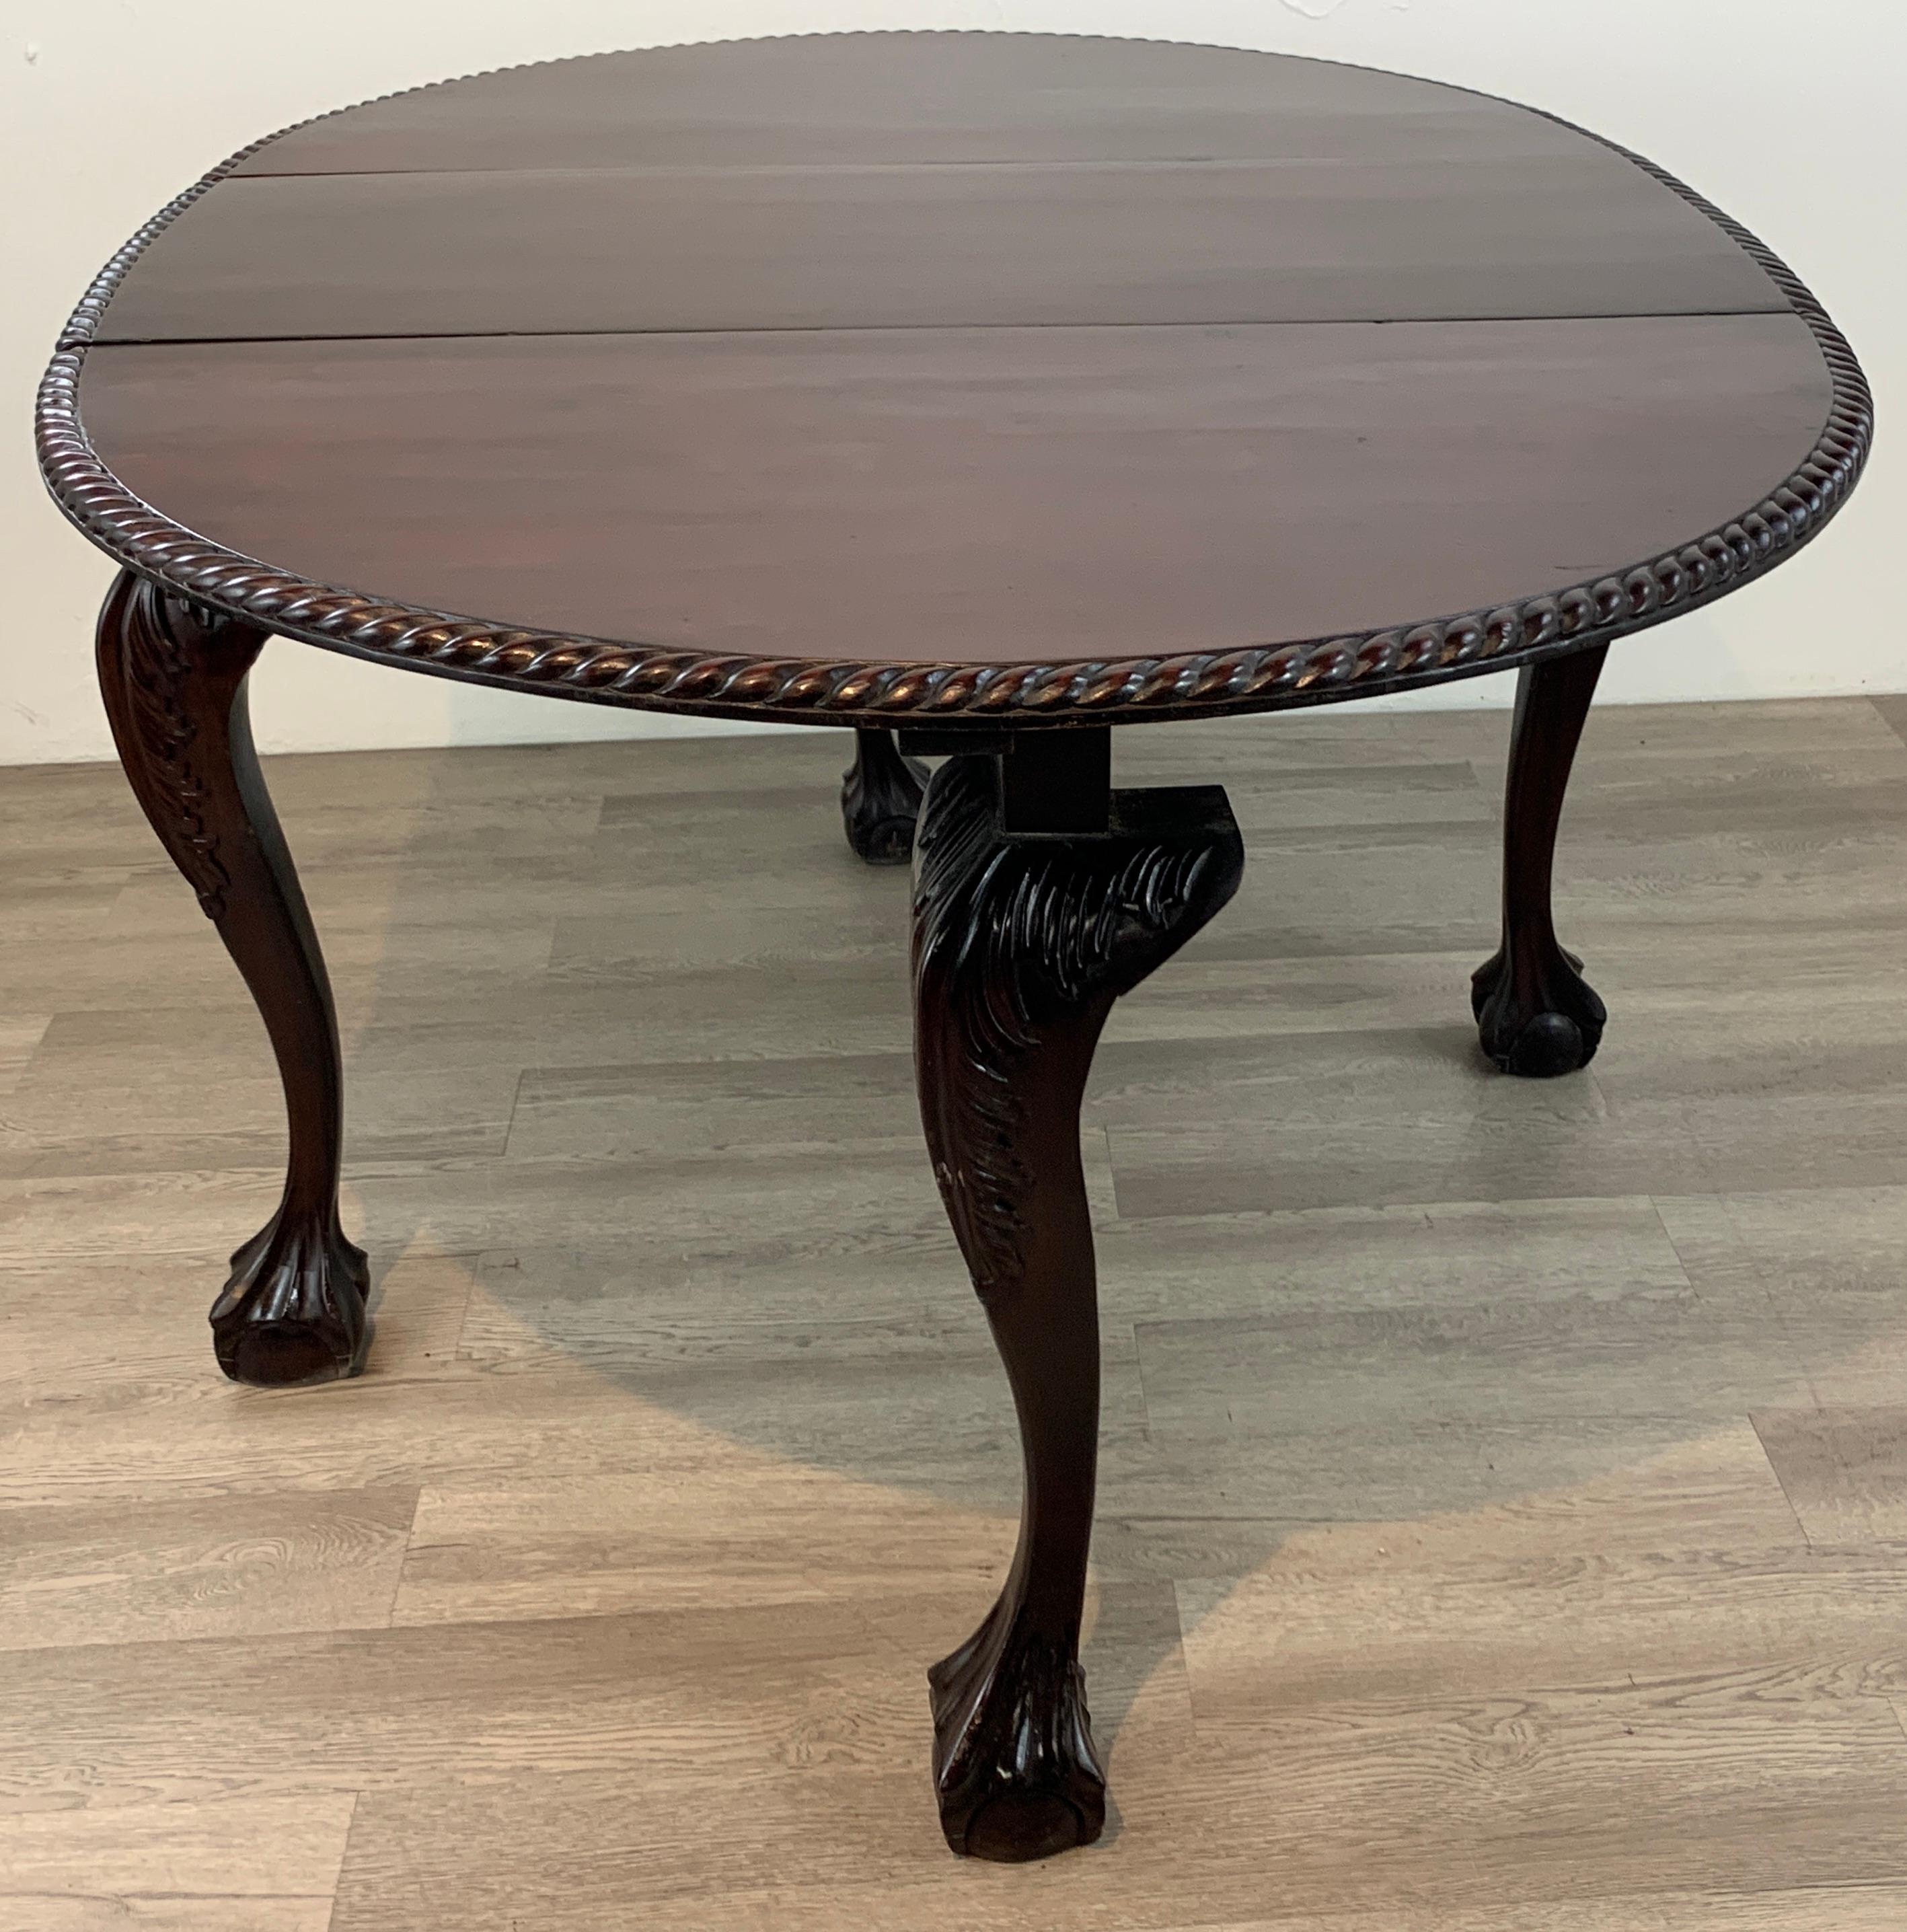 19th Century English Mahogany Ball & Claw Foot Tuck Away Dining Room Table For Sale 6